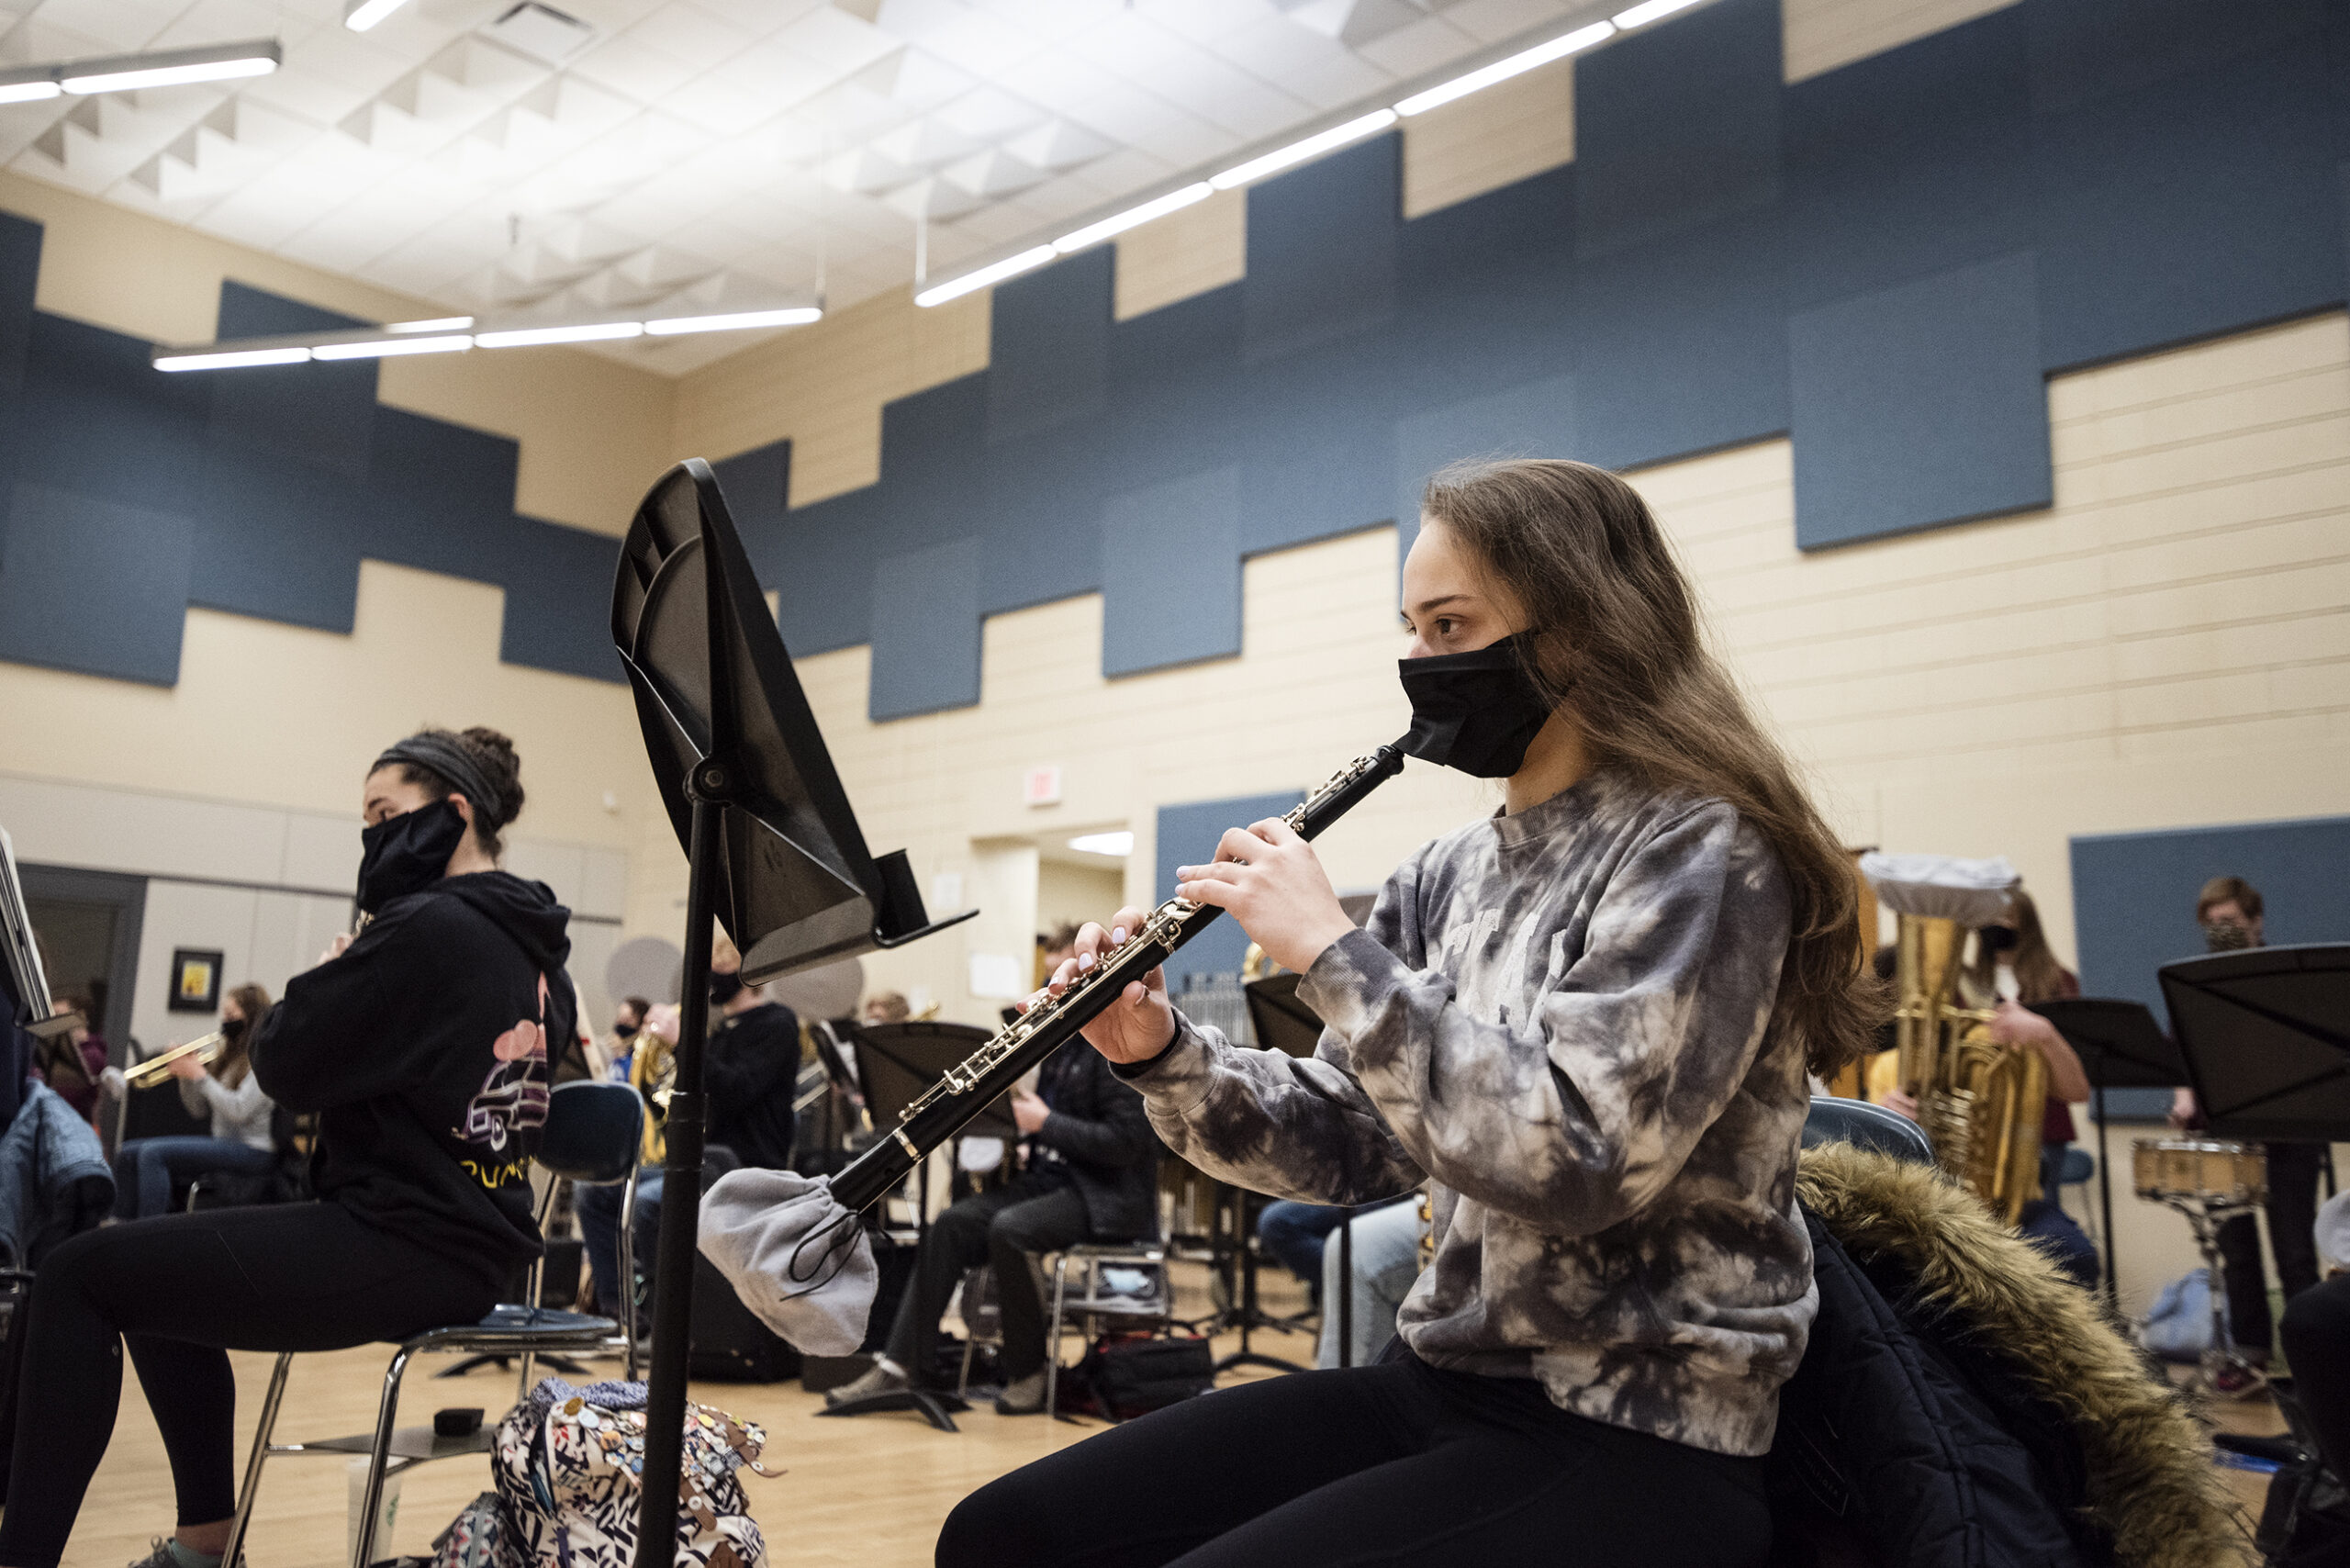 A student wears a face mask as she plays the clarinet.